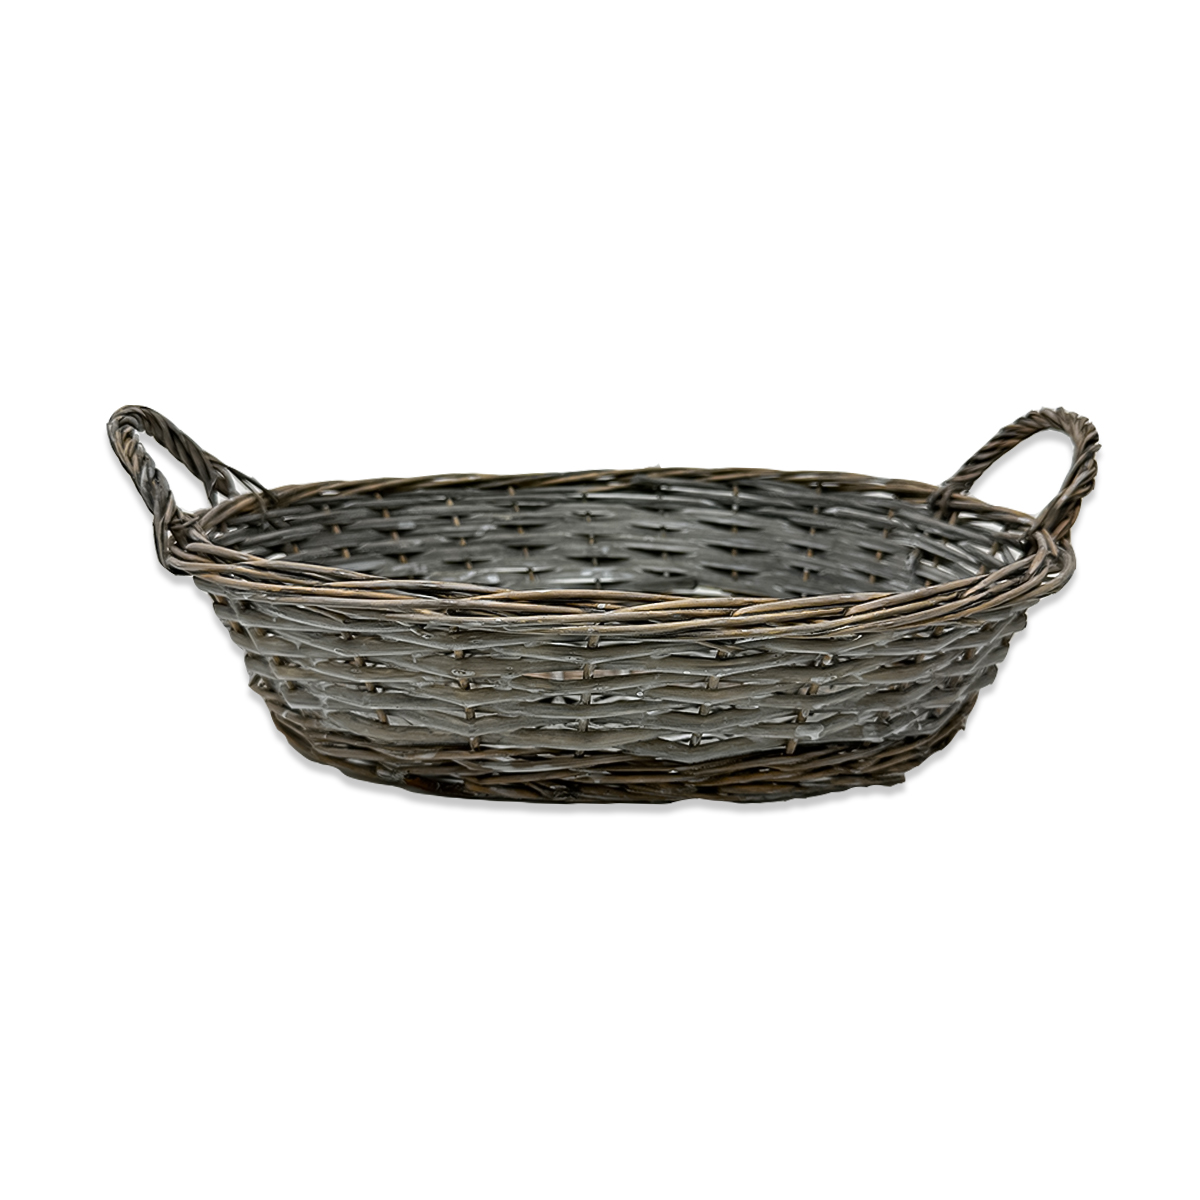 Avery Antique Grey Stain Oblong Tray Basket 14in